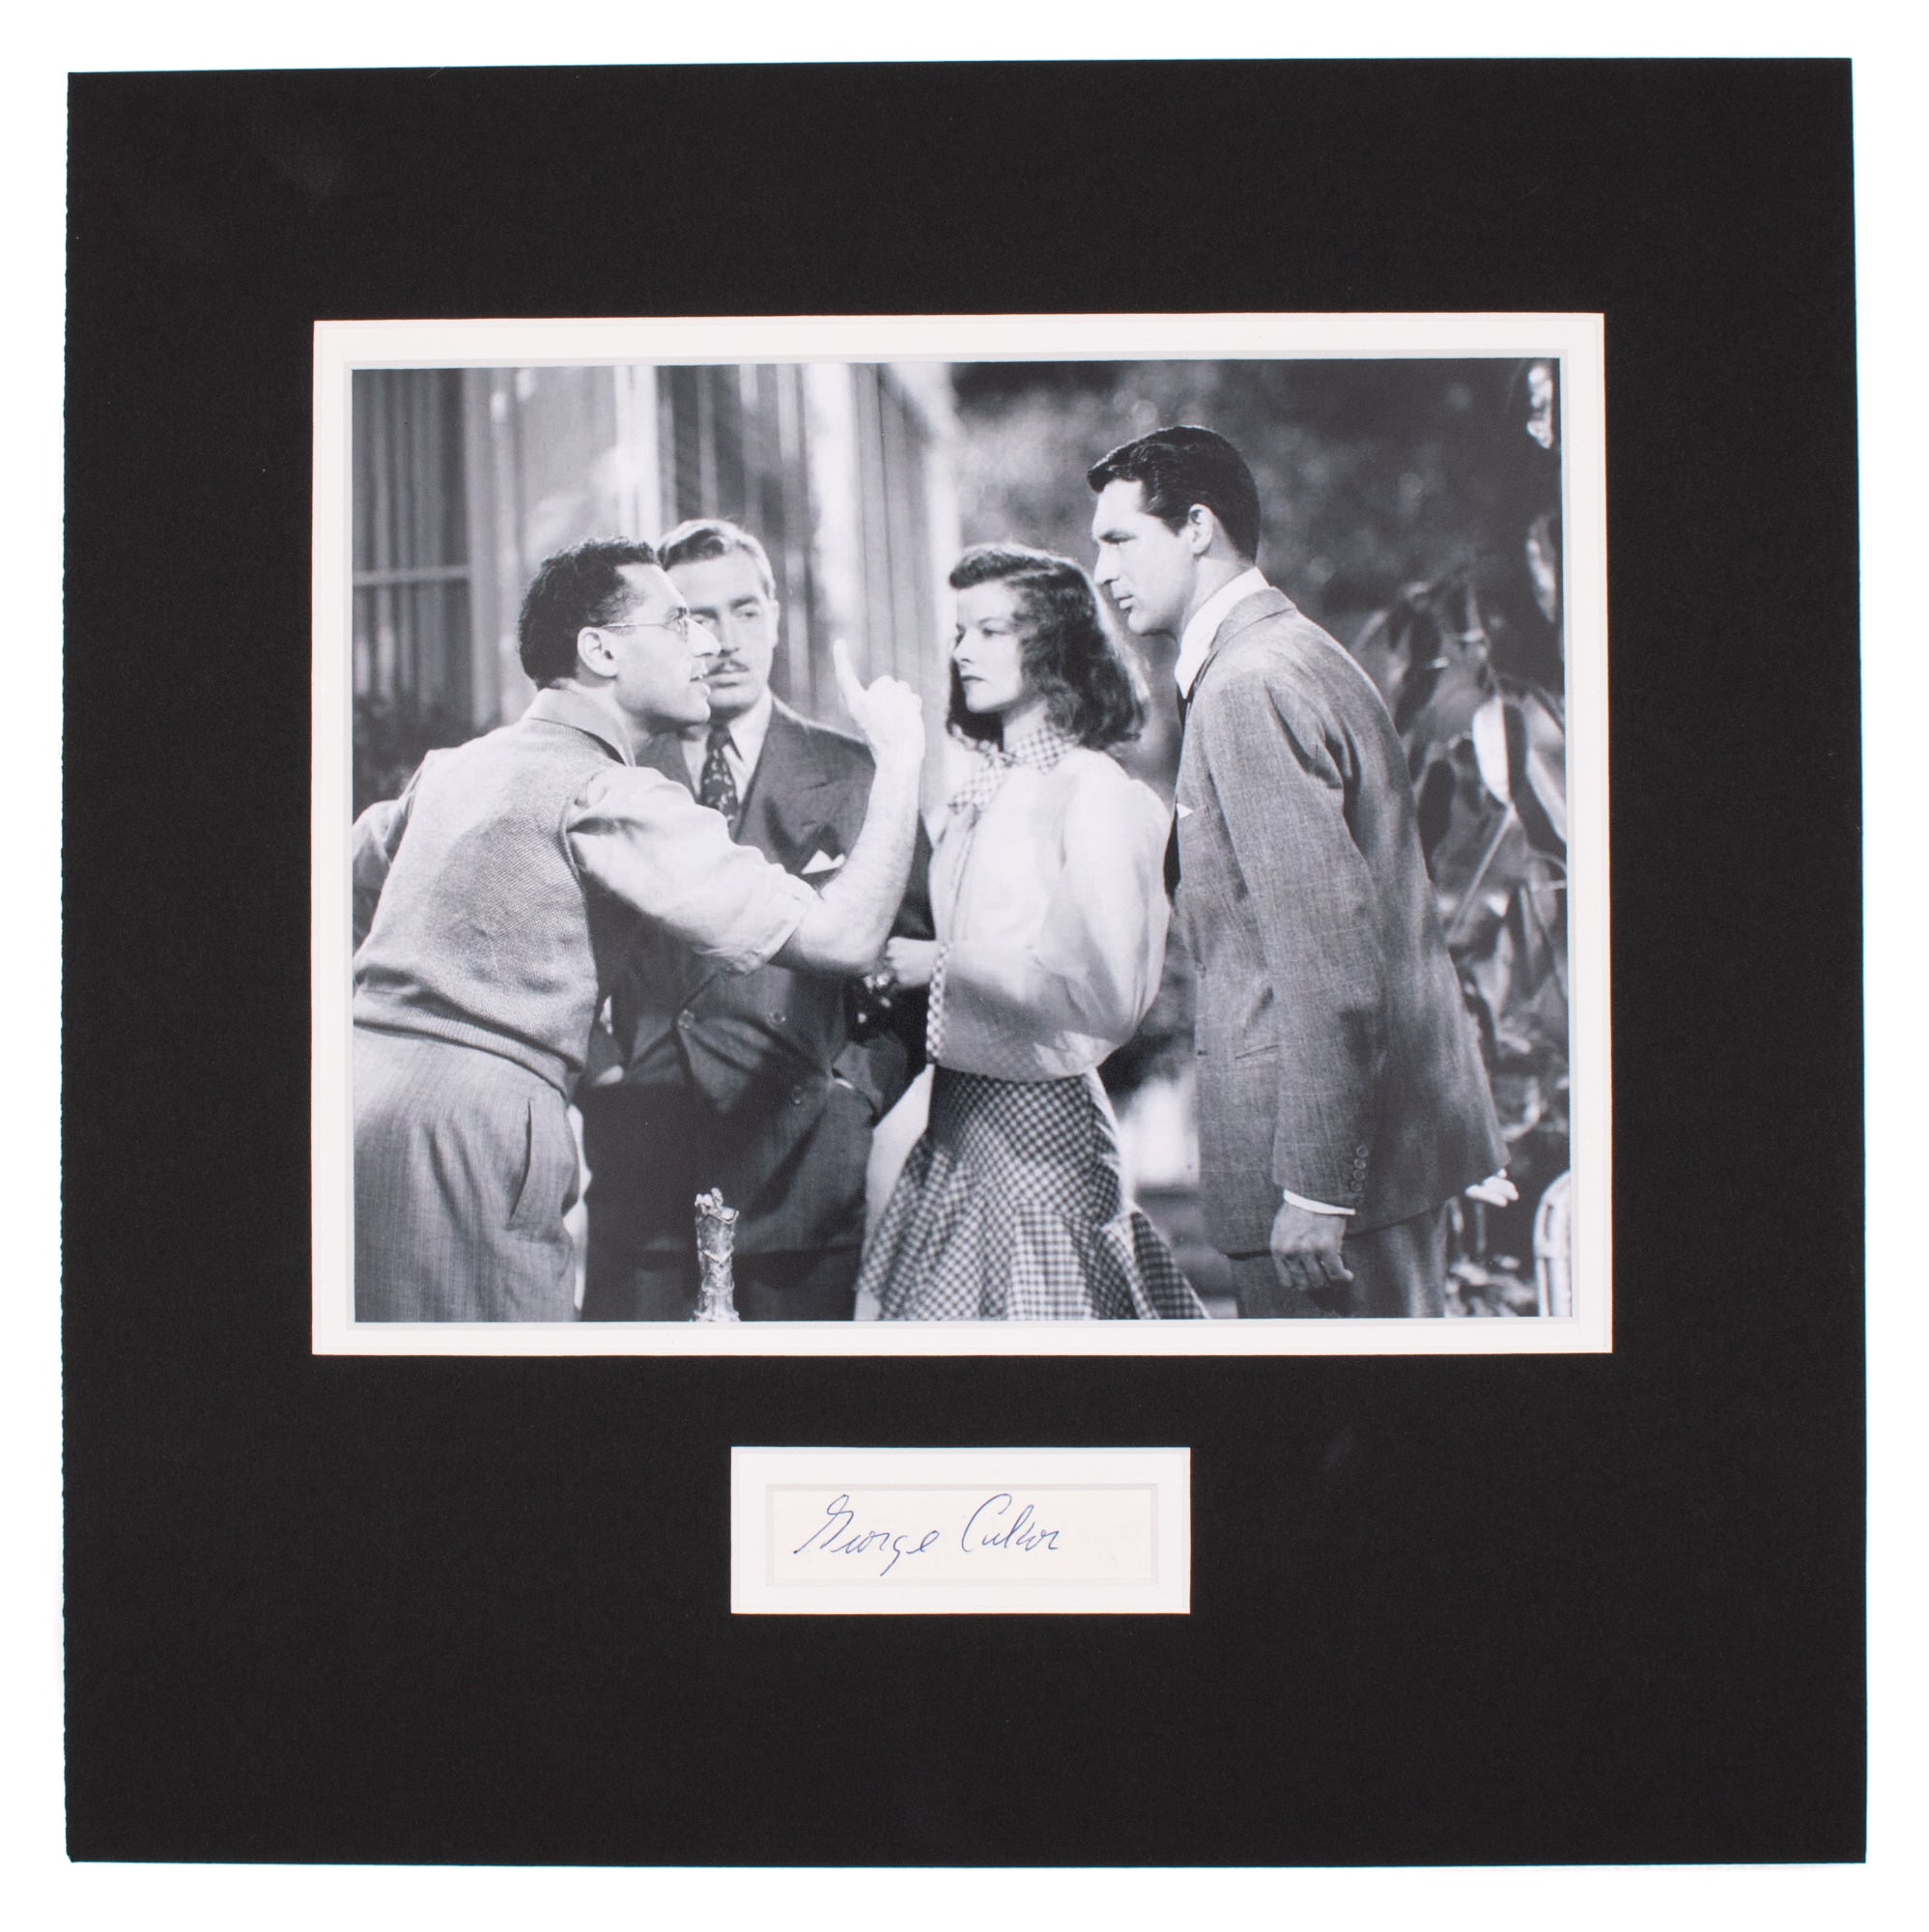 Academy Award Winning Director George Cukor Signed Auto Matted Photo Display